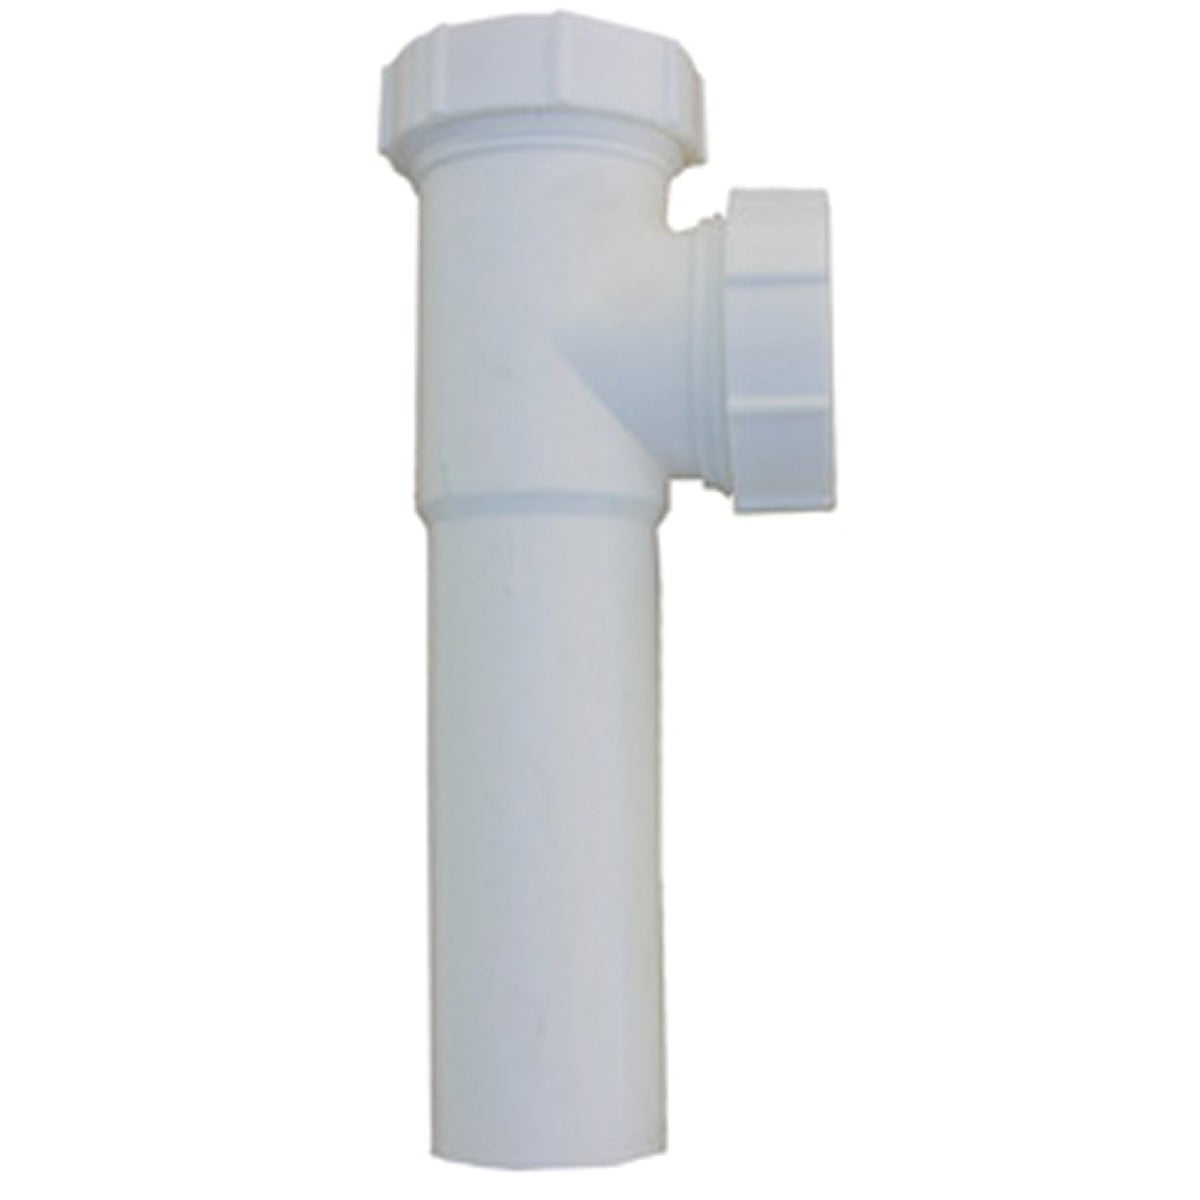 Lasco 1-1/2 In. OD White Plastic End Outlet Tee